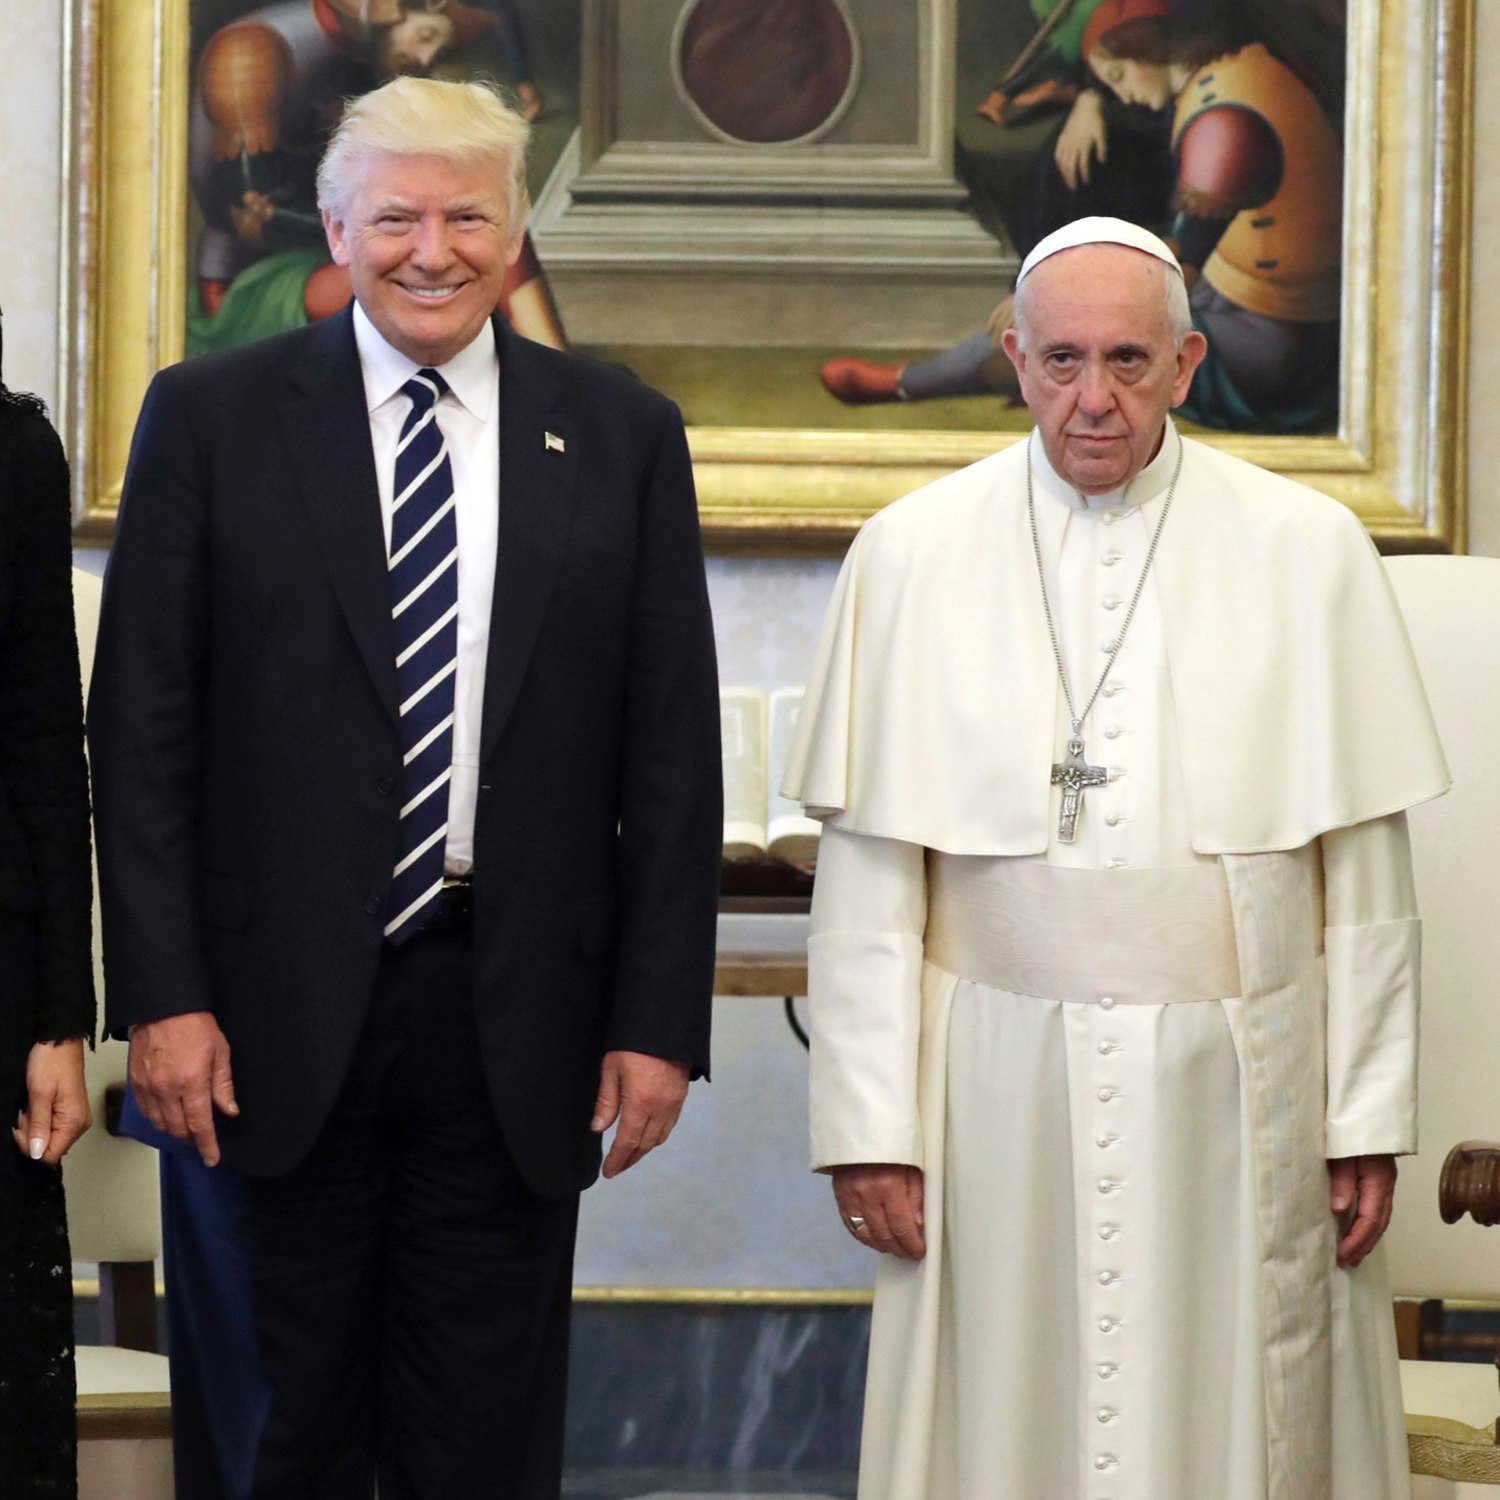 Åben Luminans offer Trump to Pope Francis After Vatican Meeting: I 'Won't Forget What You Said'